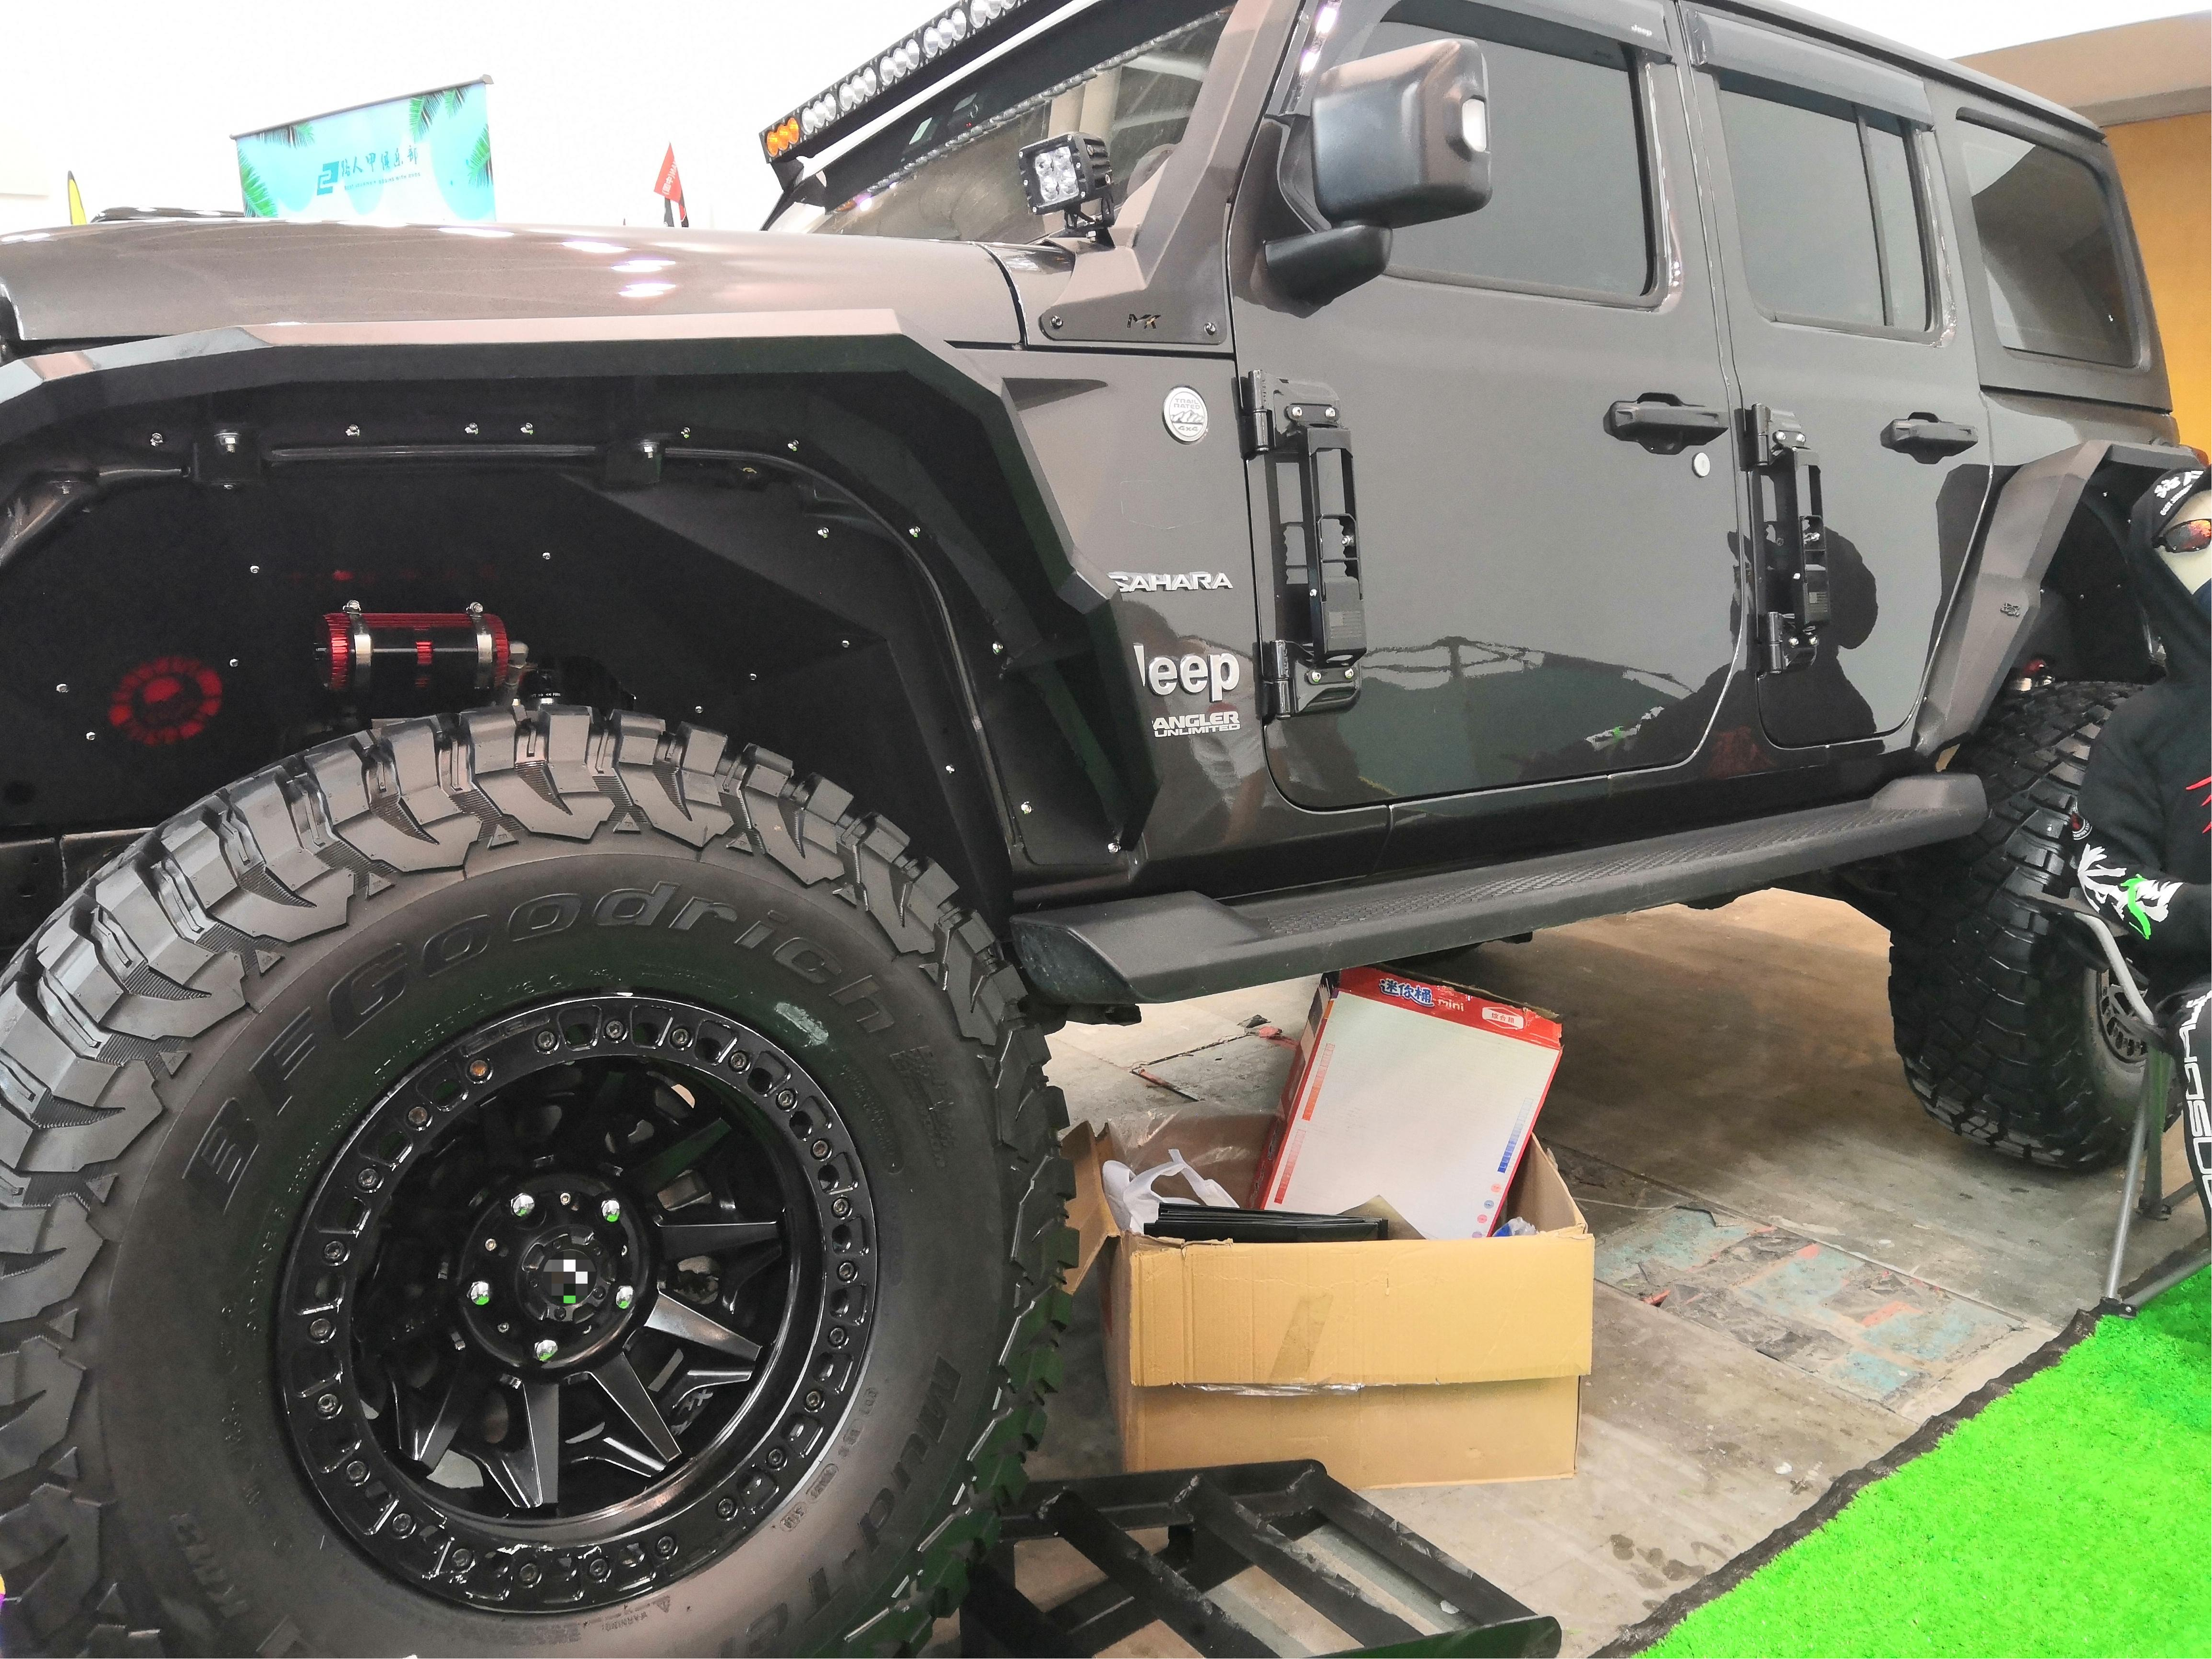 THE ALL-NEW OR003: Rayone’S LATEST 6-LUG  OFF-ROAD WHEEL